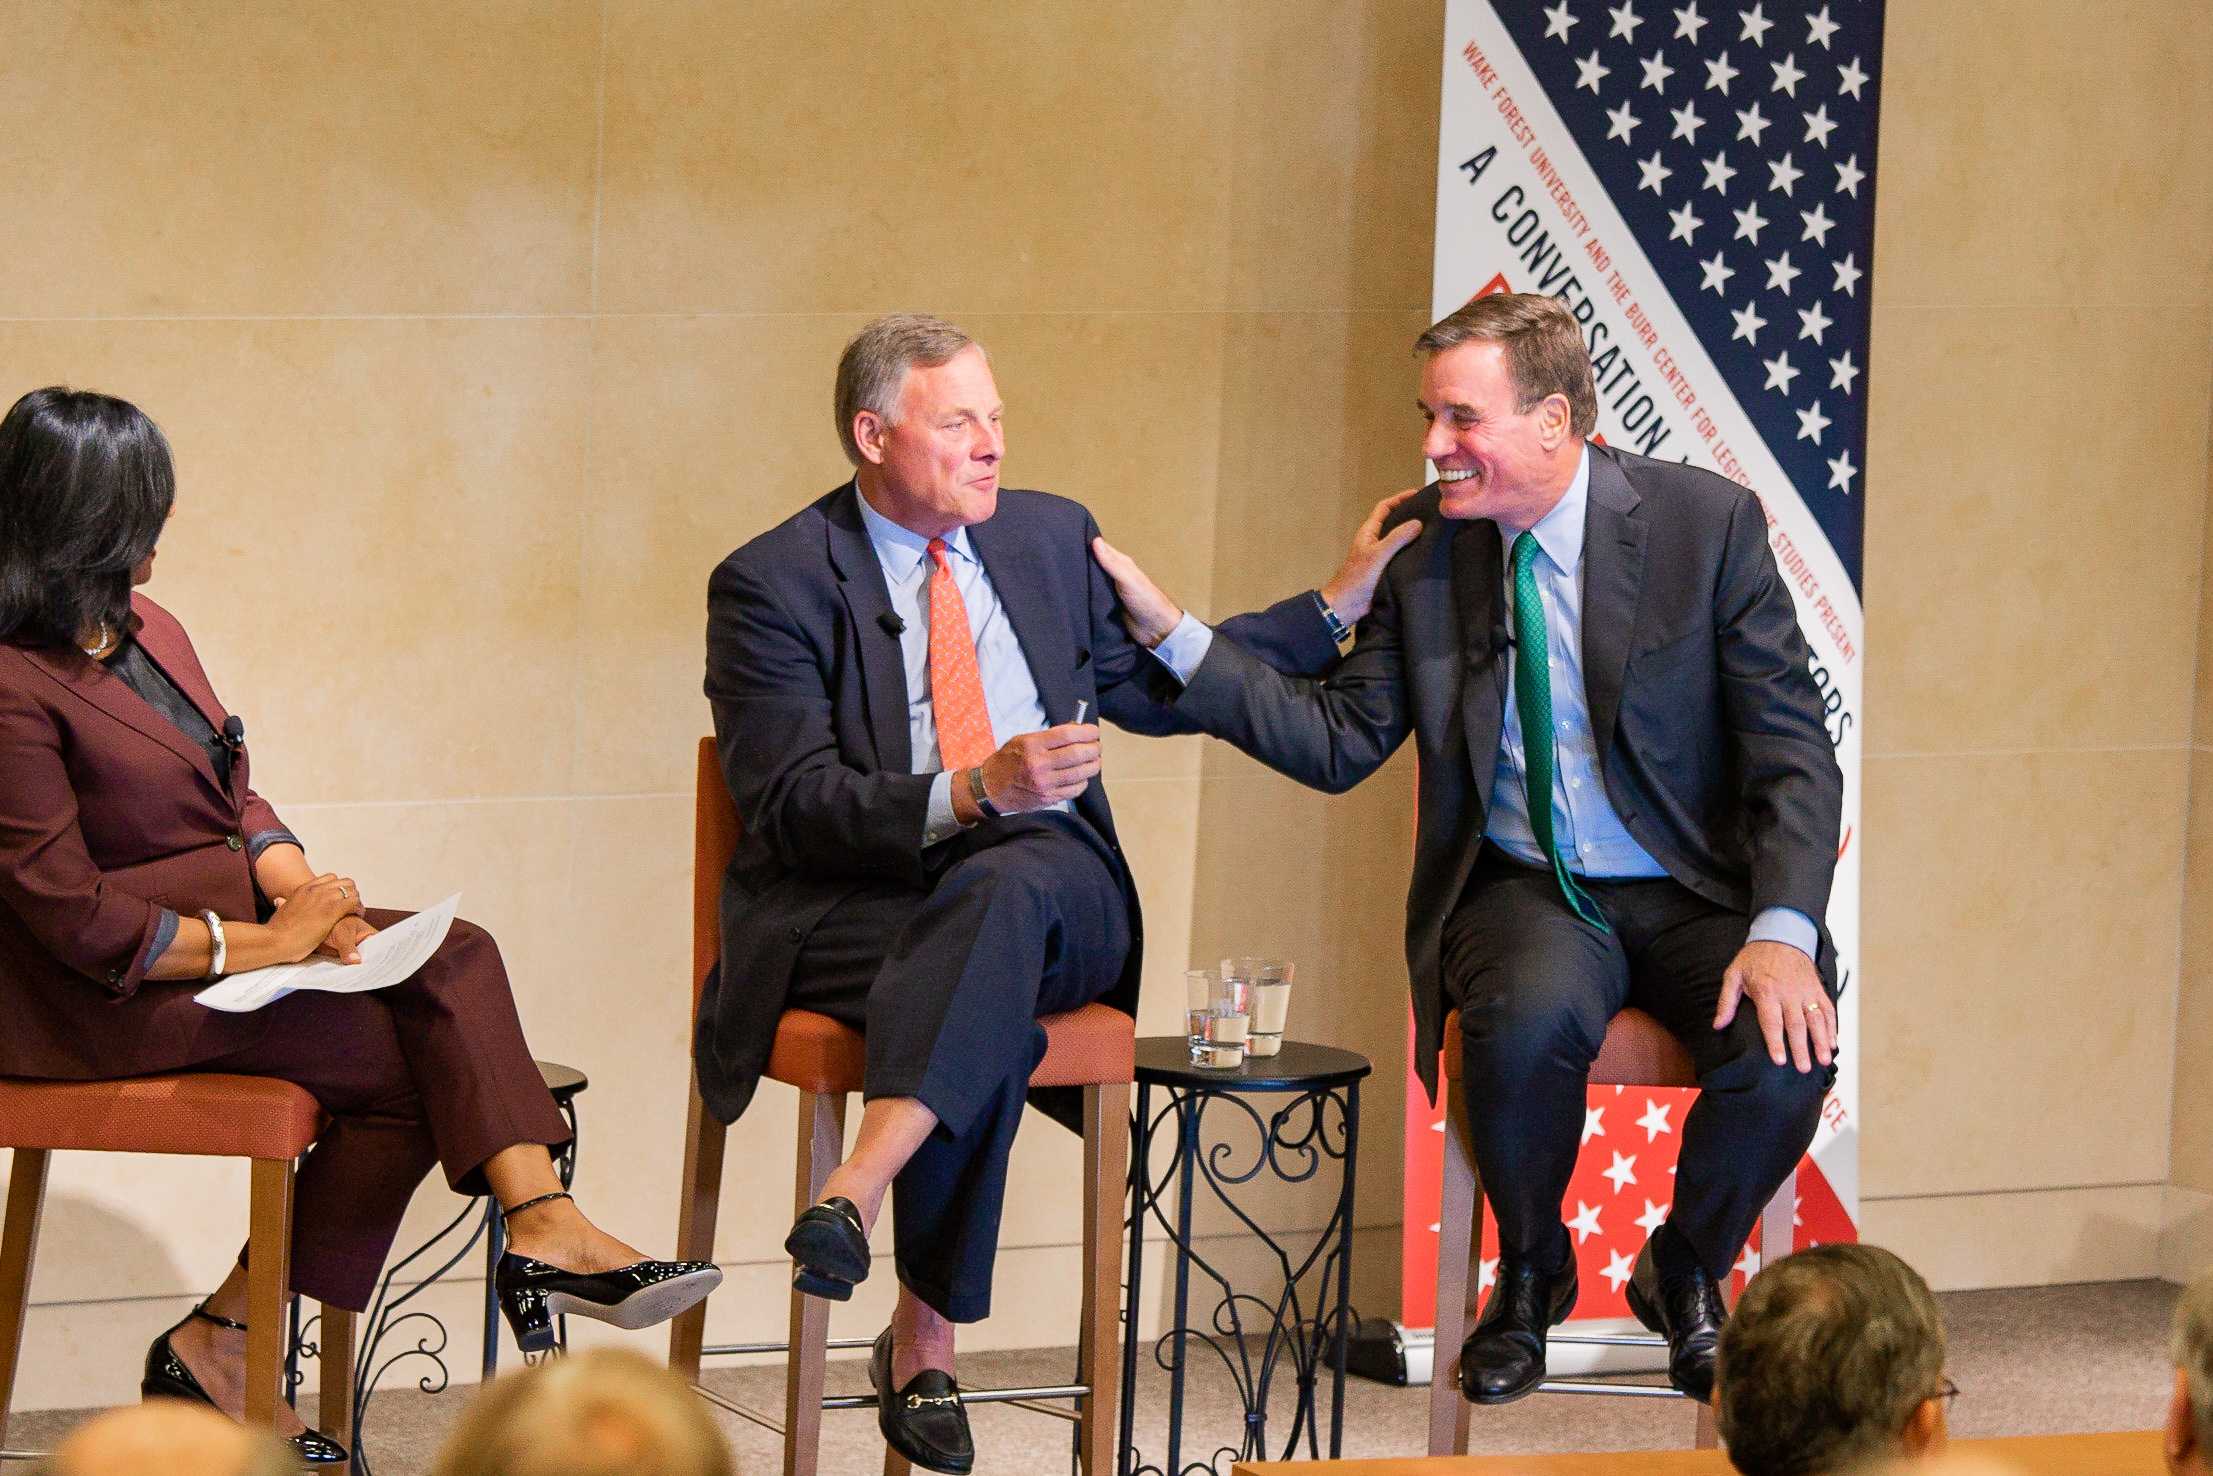 Senators Richard Burr and Mark Warner, Chair and Co-Chair of the Senate intelligence Committee, talk to the community at Wake Forest University on Monday, November 11, 2019.